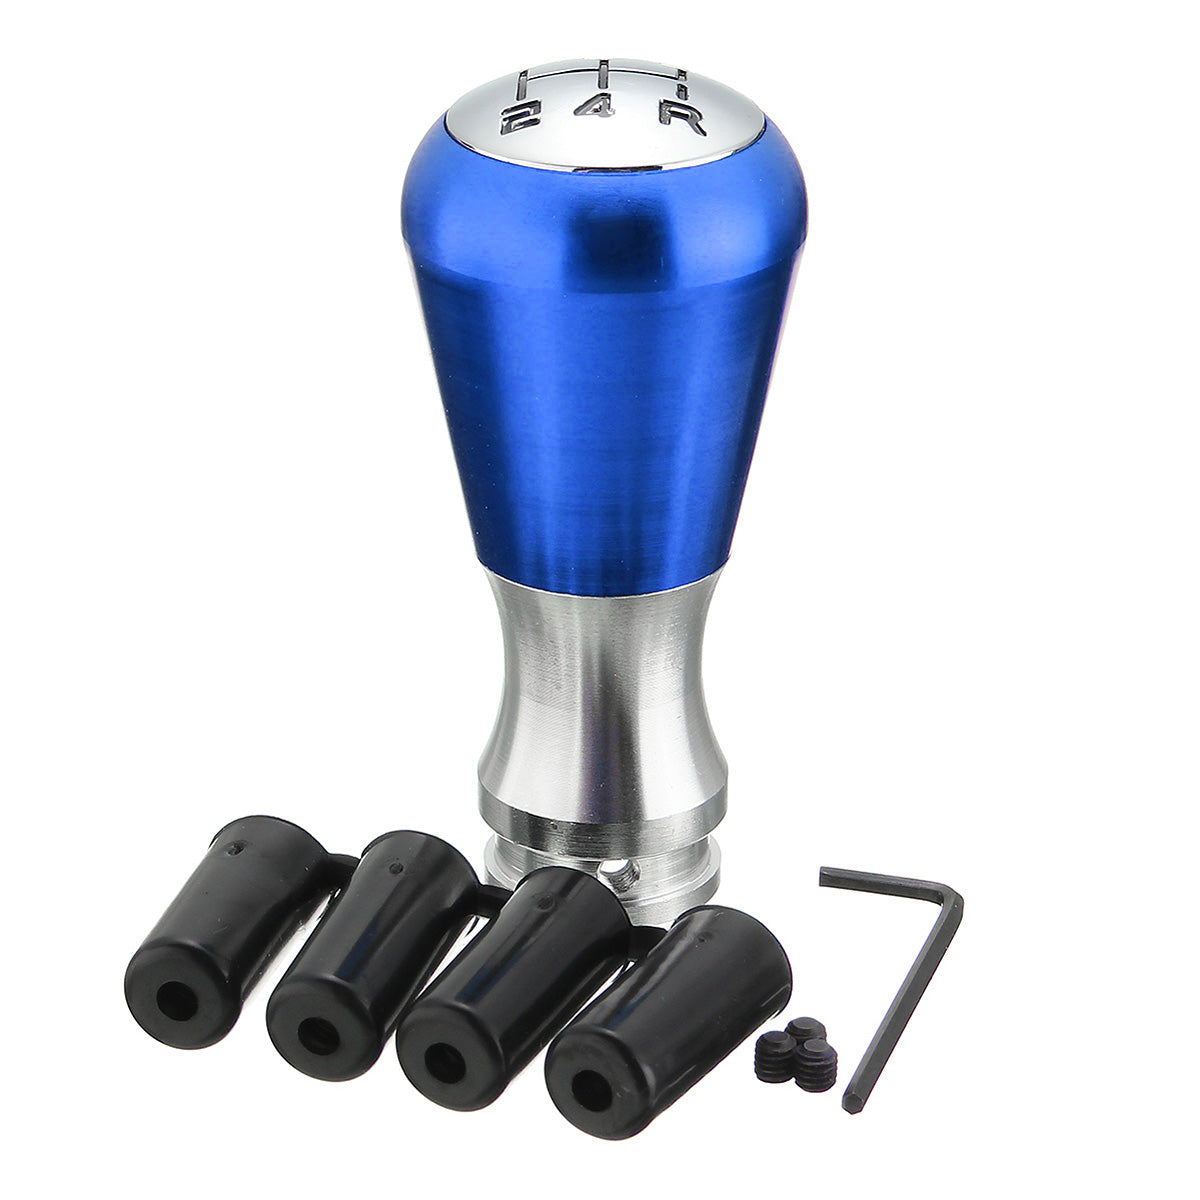 Dark Slate Blue 5 Speed Manual Gear Shift Knob Aluminum Alloy Black/Blue/Red with Adapter For Peugeot 405 307 206